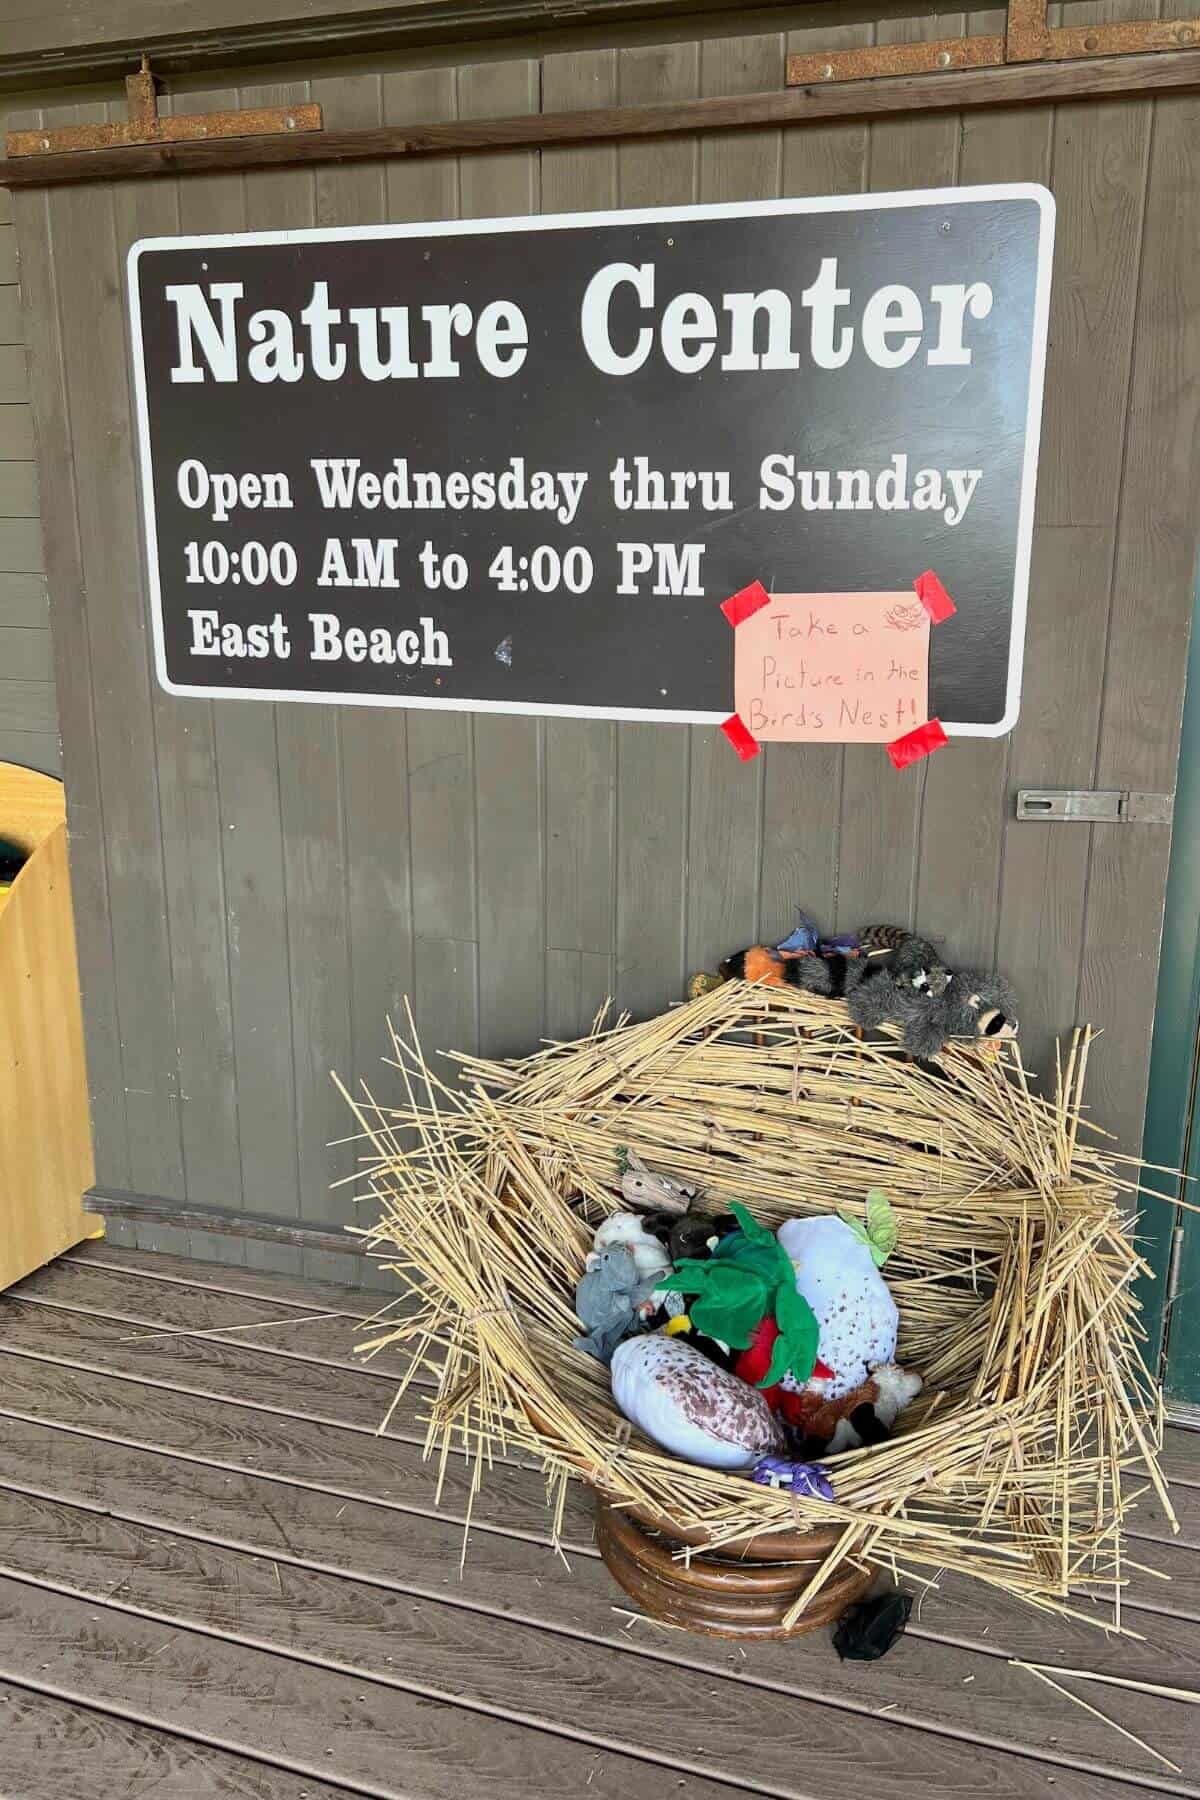 nature center sign with hours on it.